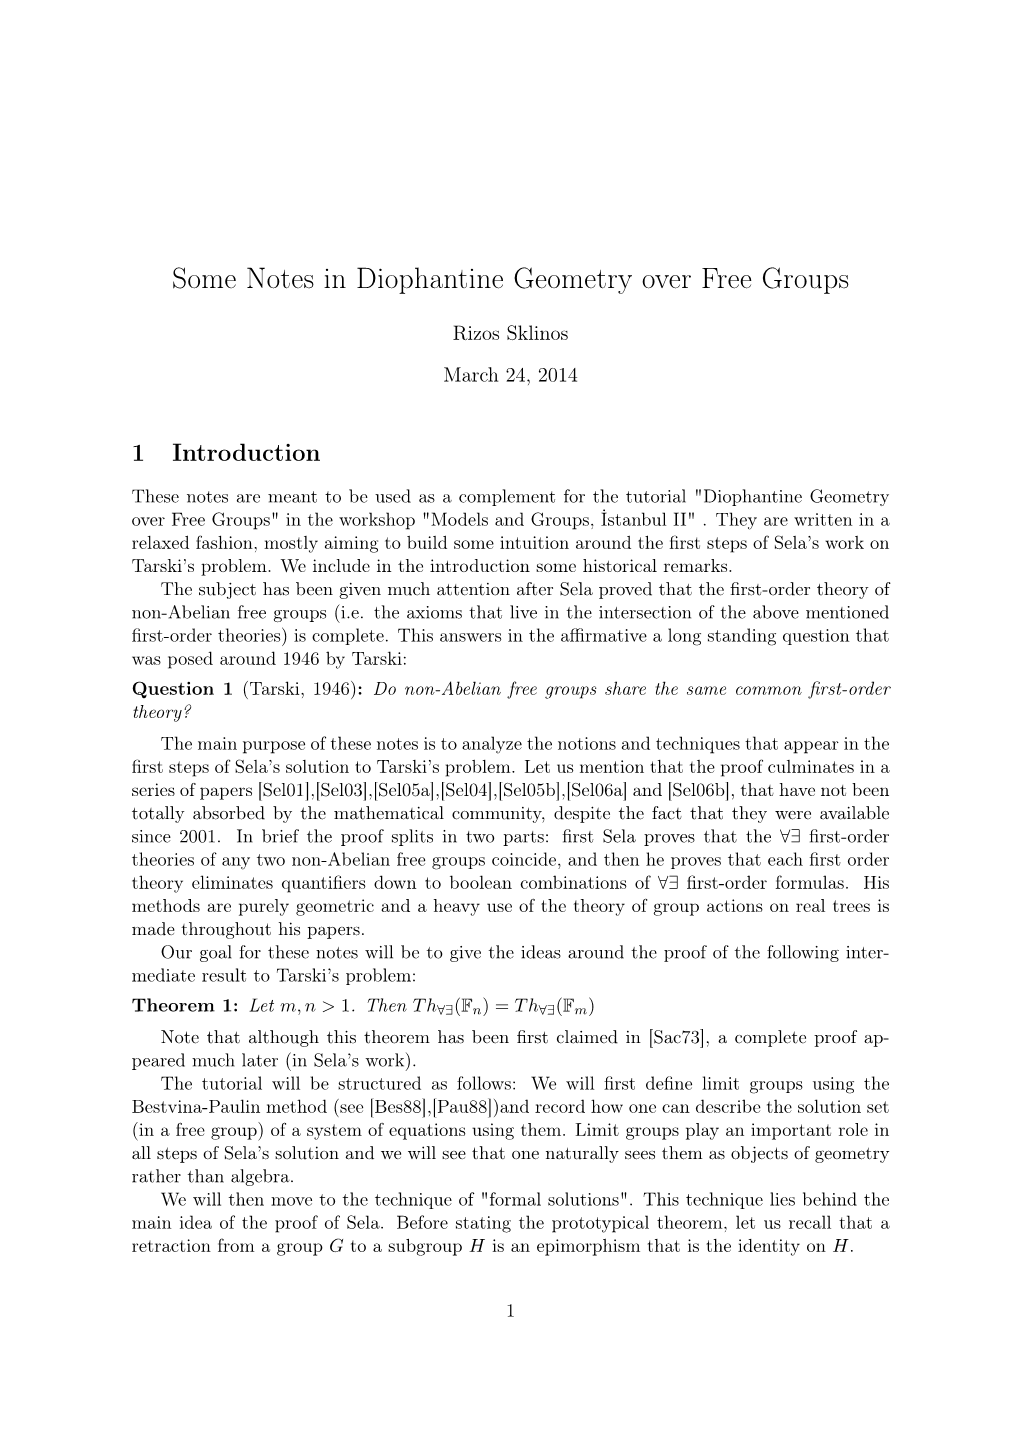 Some Notes in Diophantine Geometry Over Free Groups